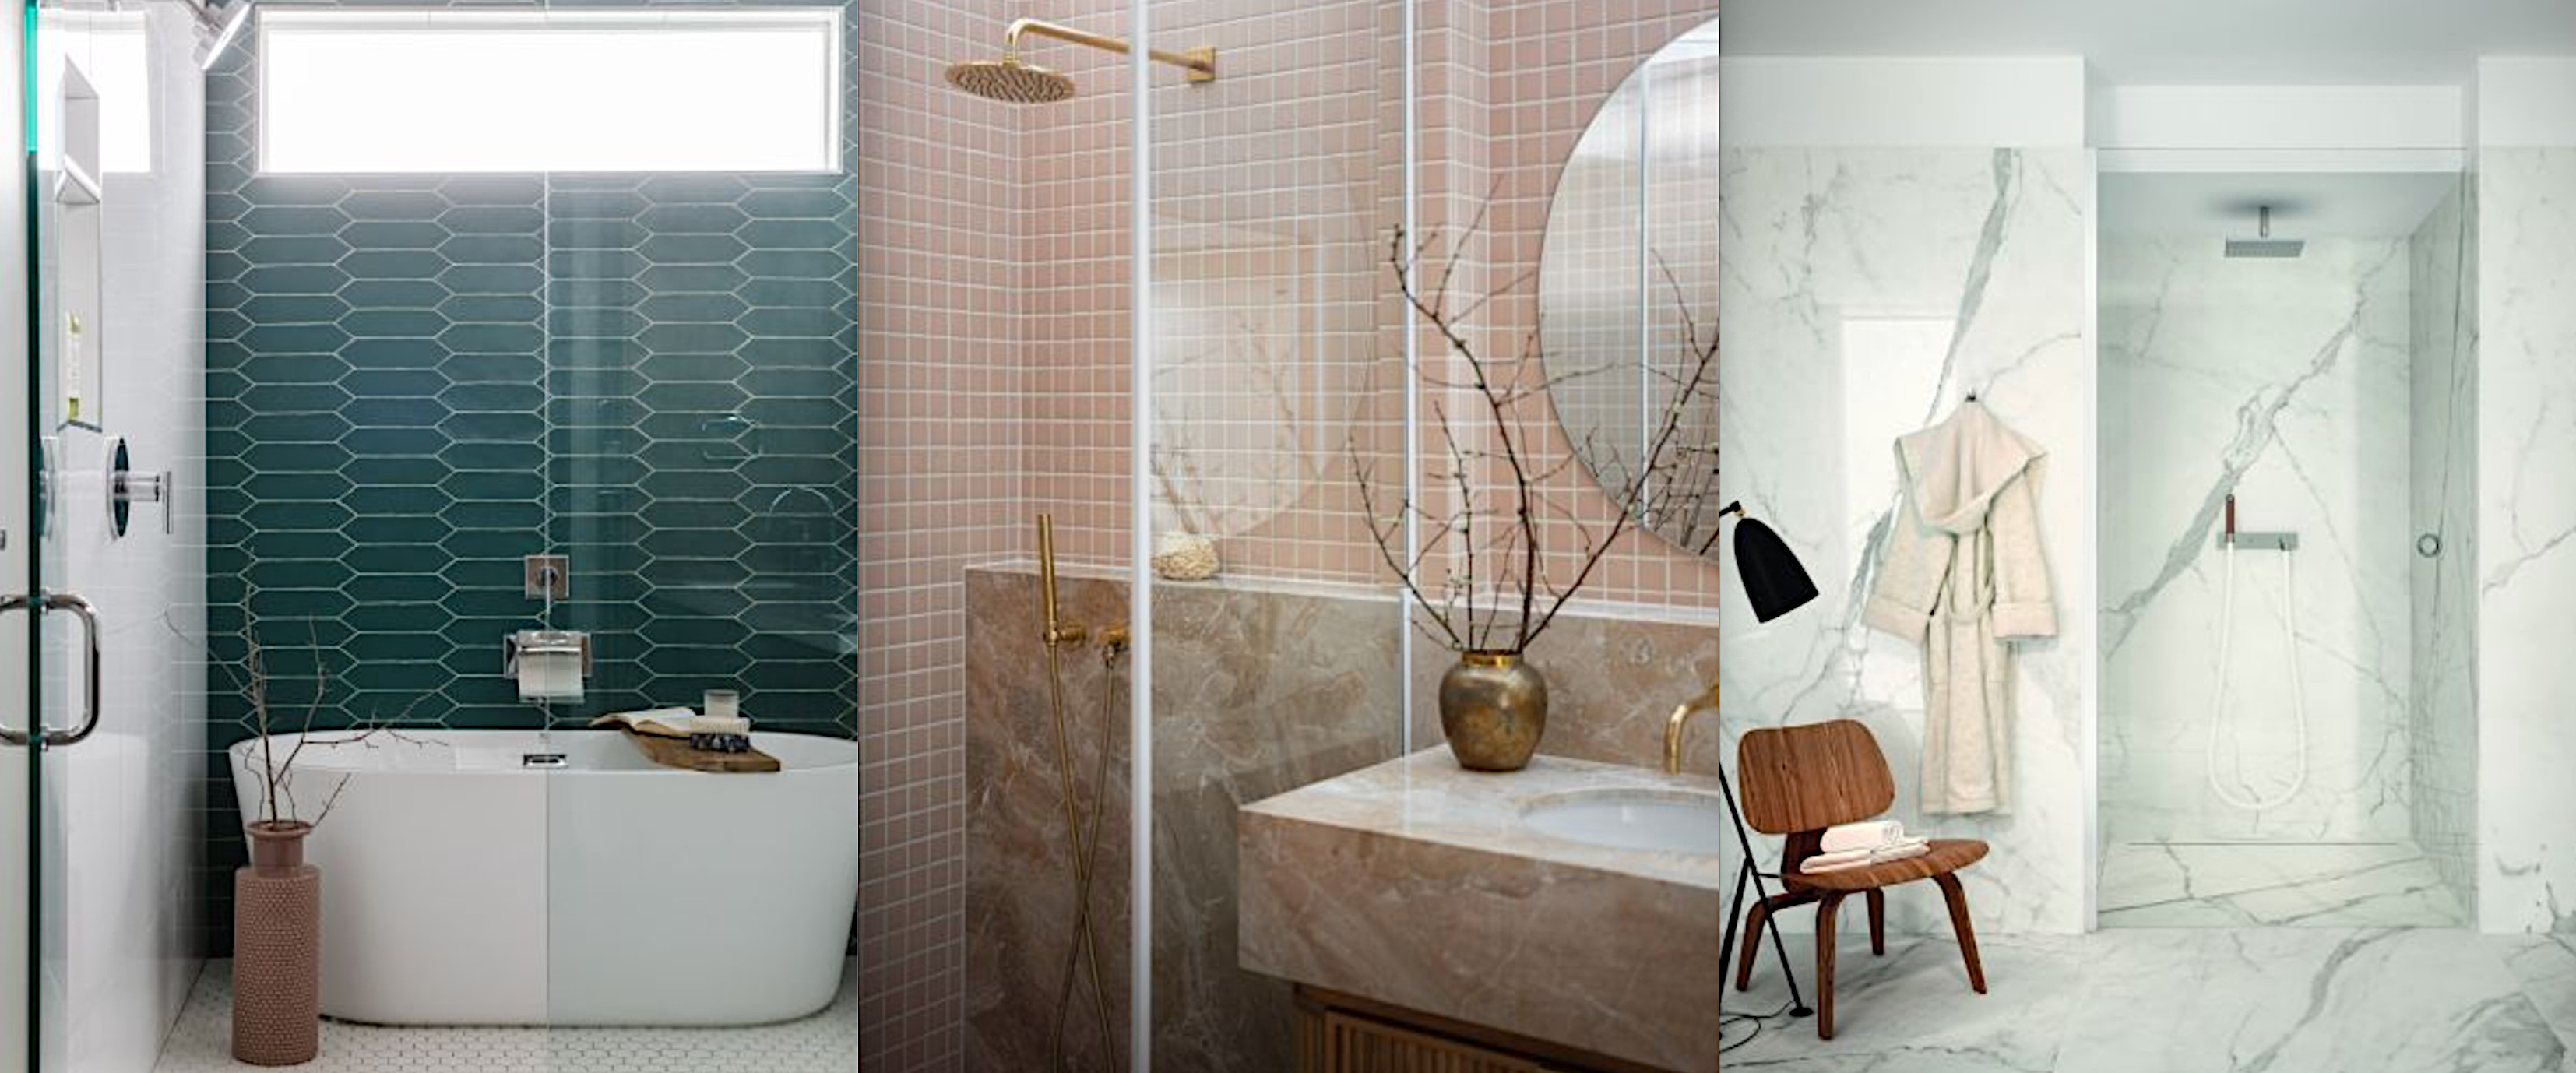 Small Bathroom Shower Tile Ideas: 10 Looks That Stretch Space |